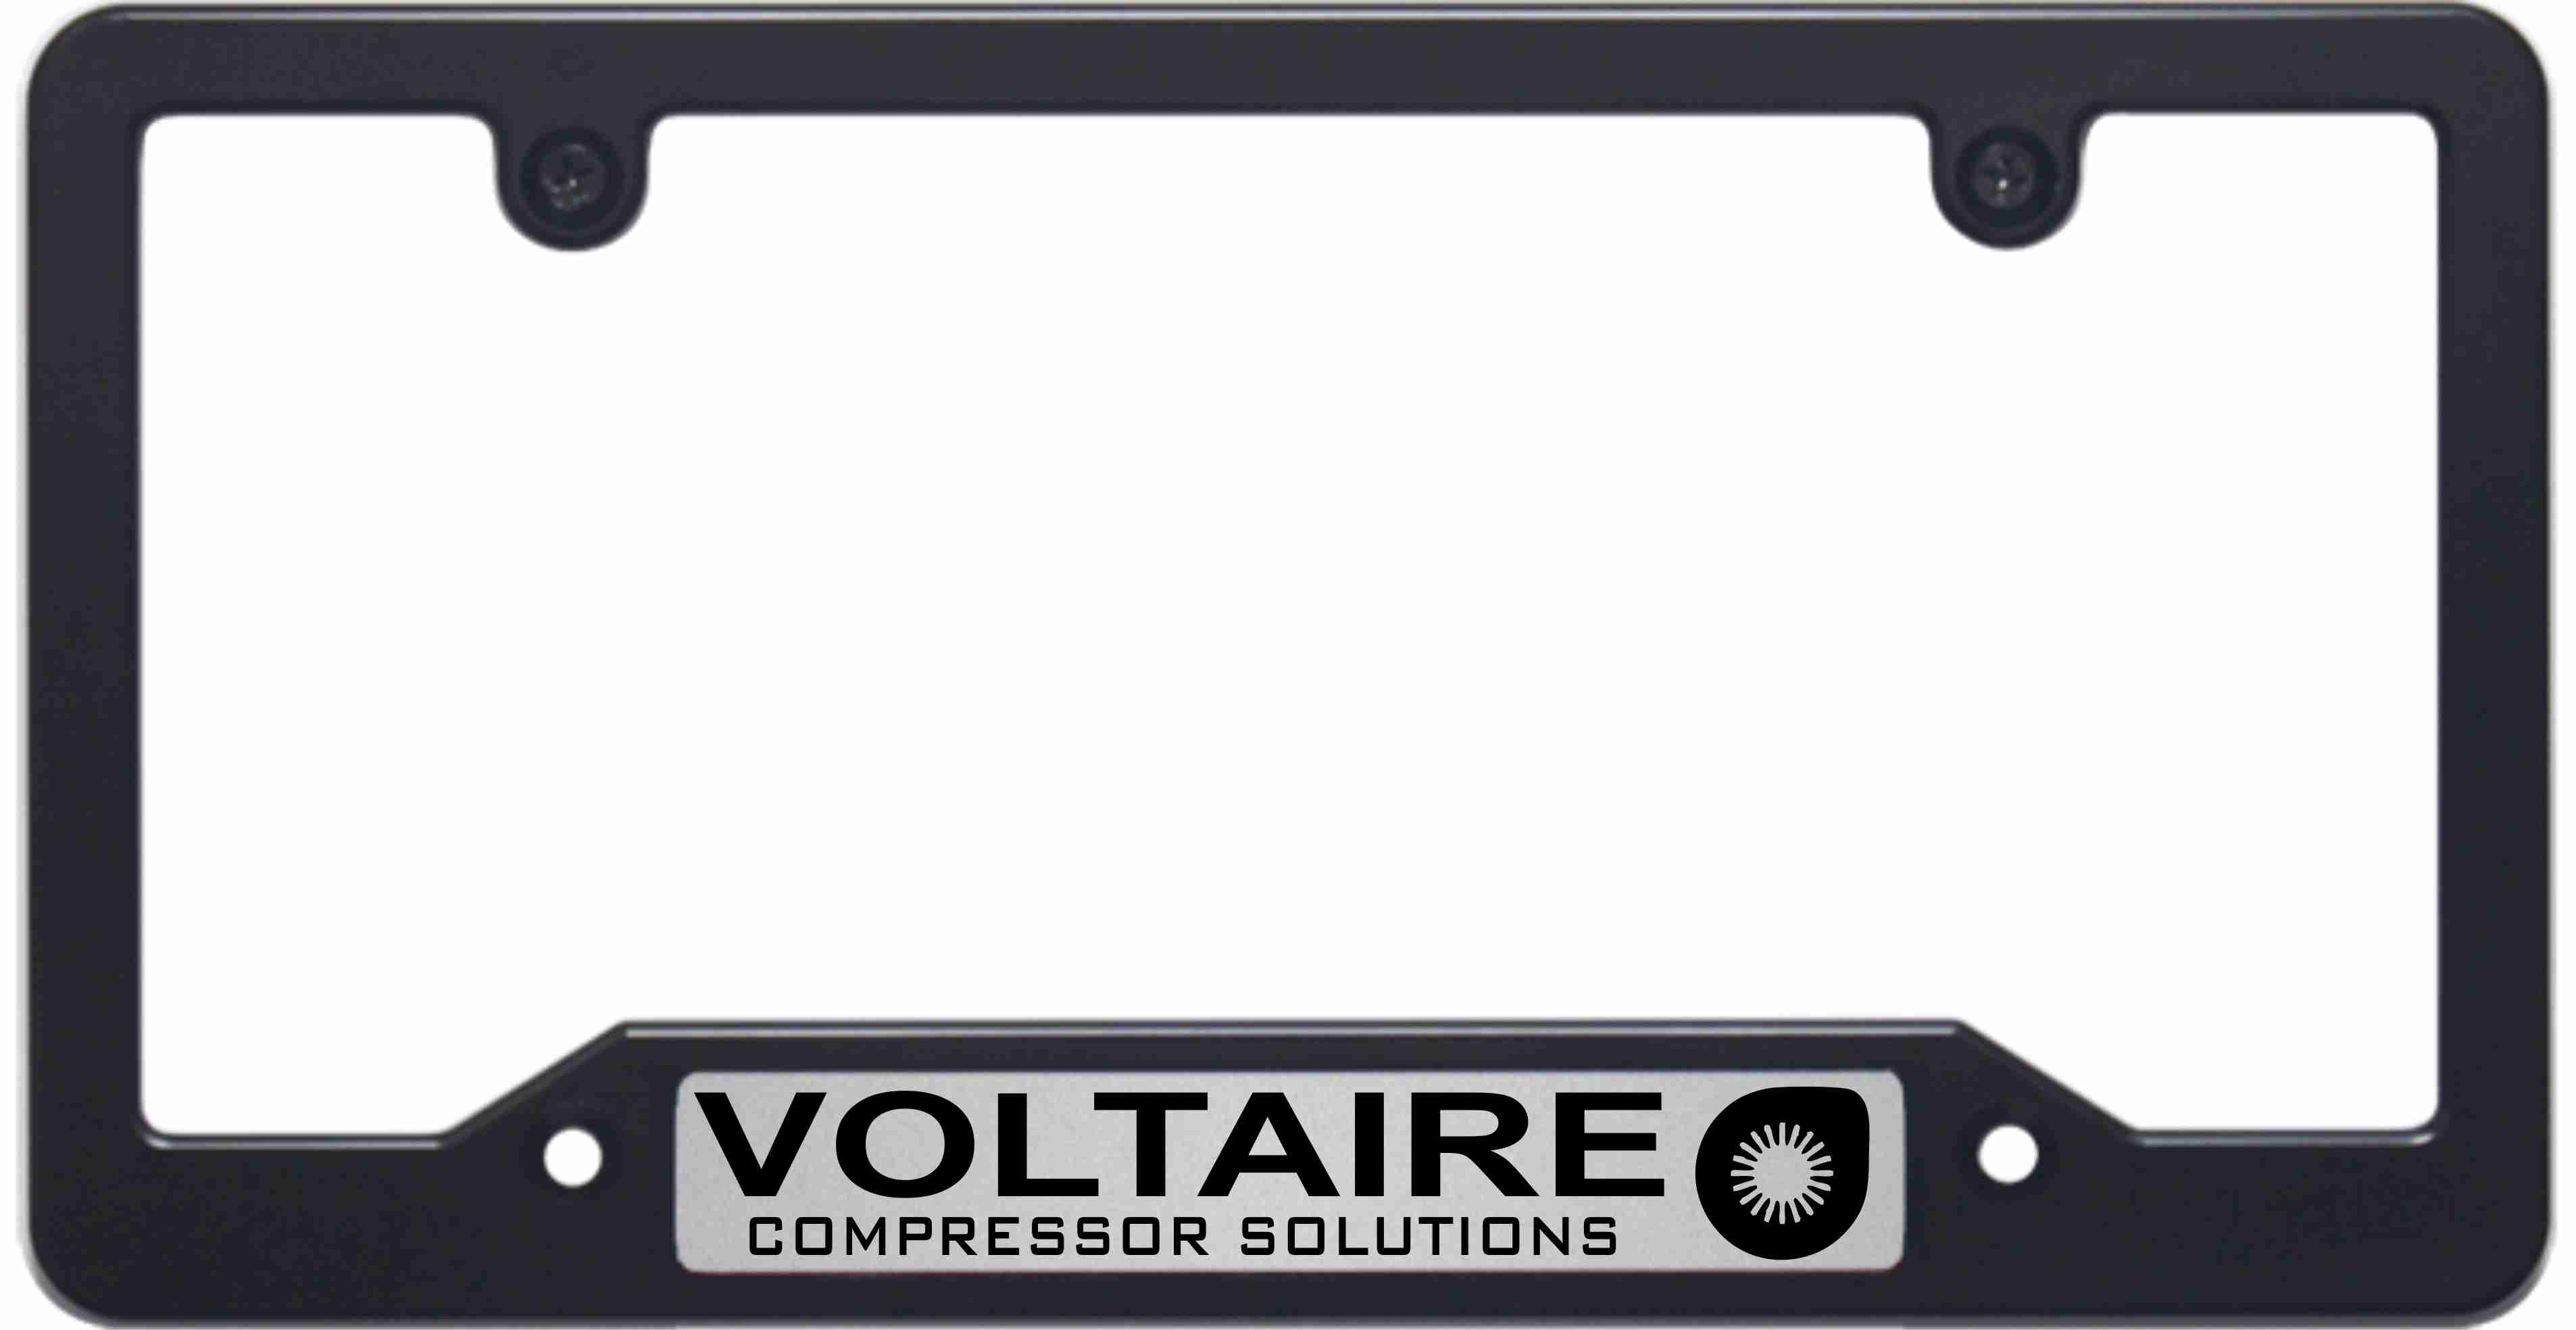 Voltaire - custom CNC machined license plate frame